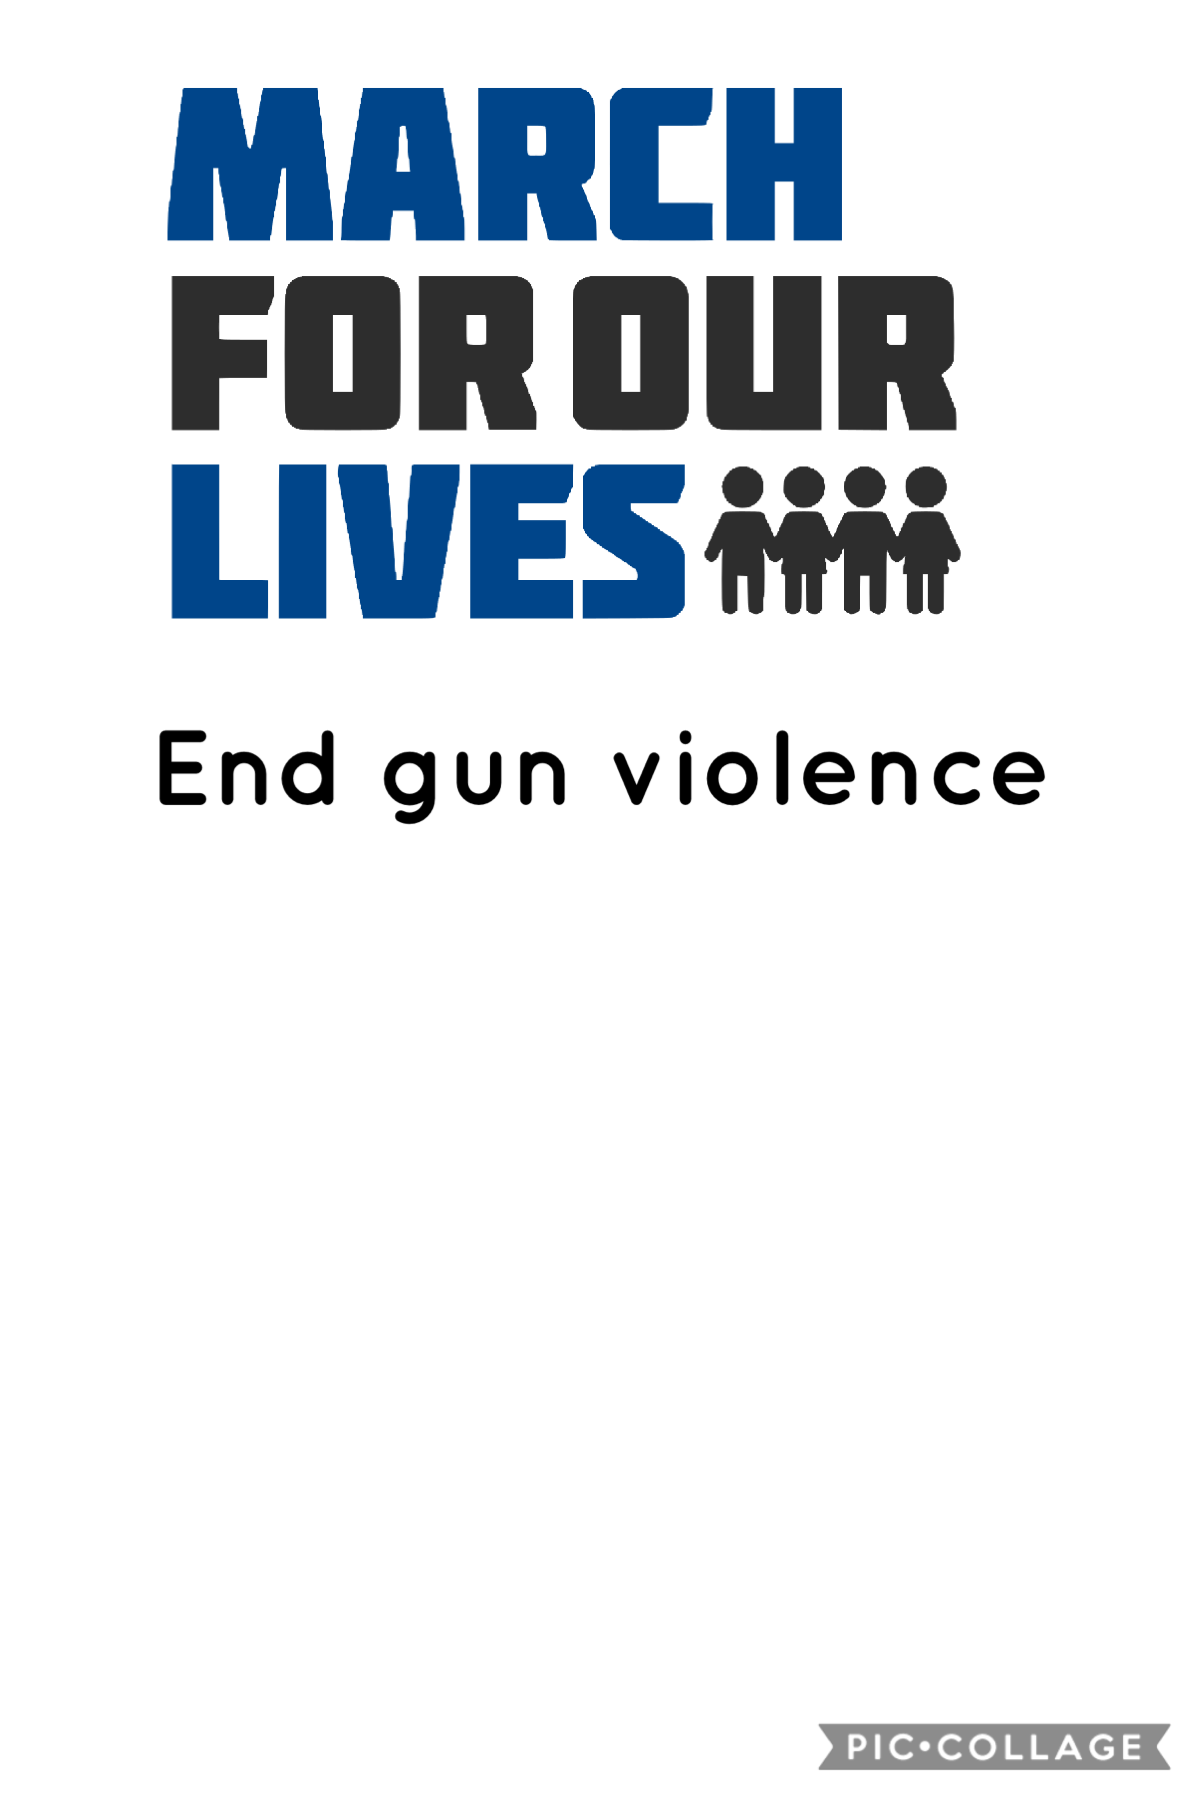 March for our lives 